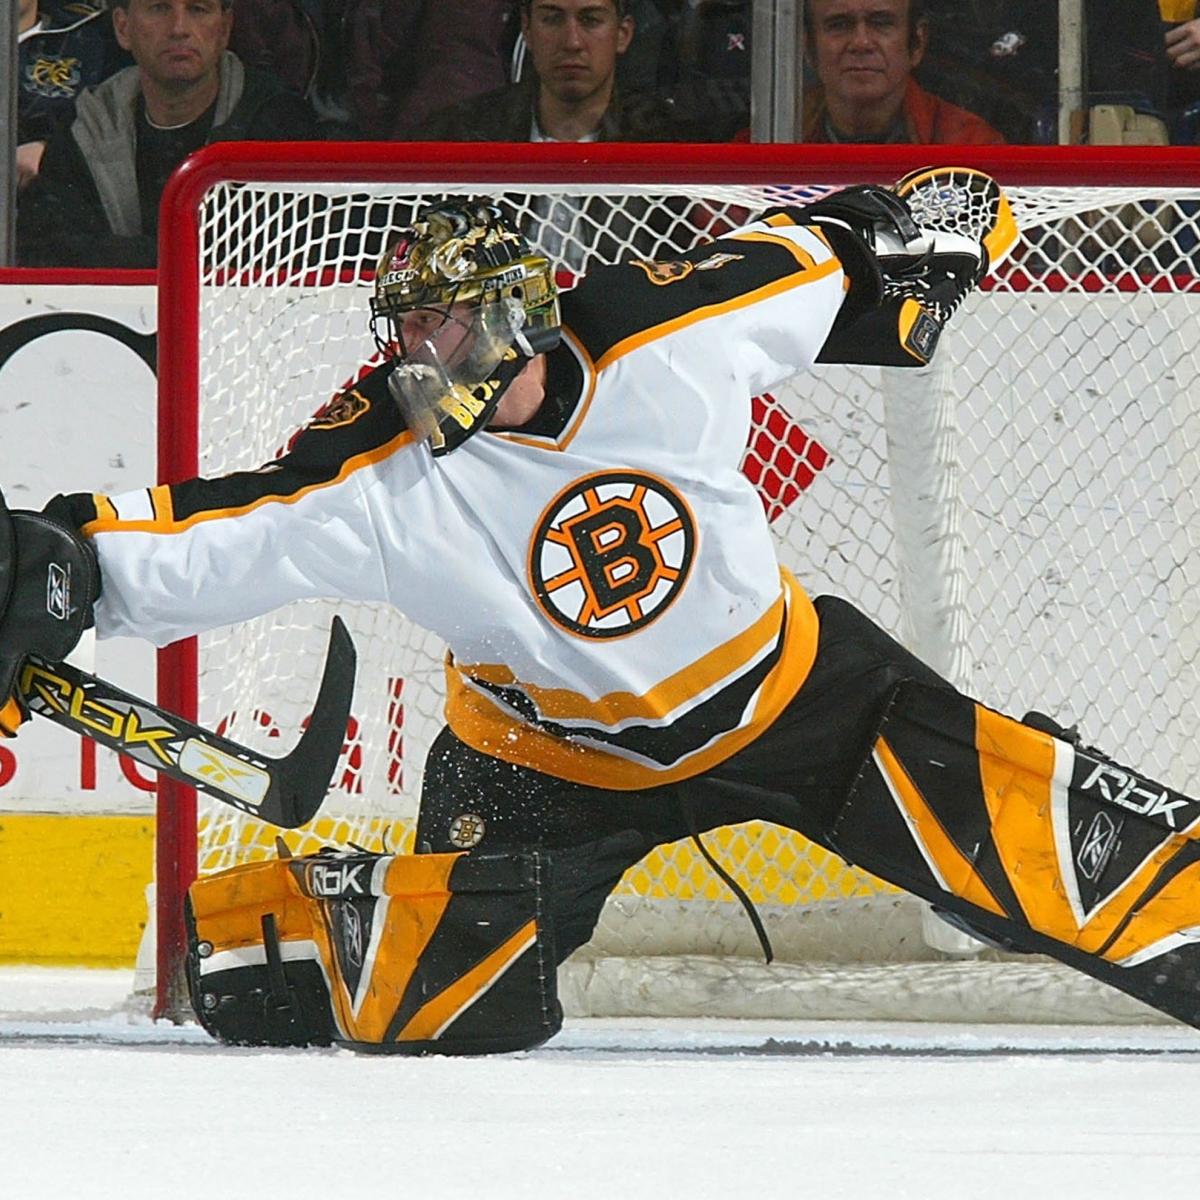 Bussi a reliable rookie in Bruins' net